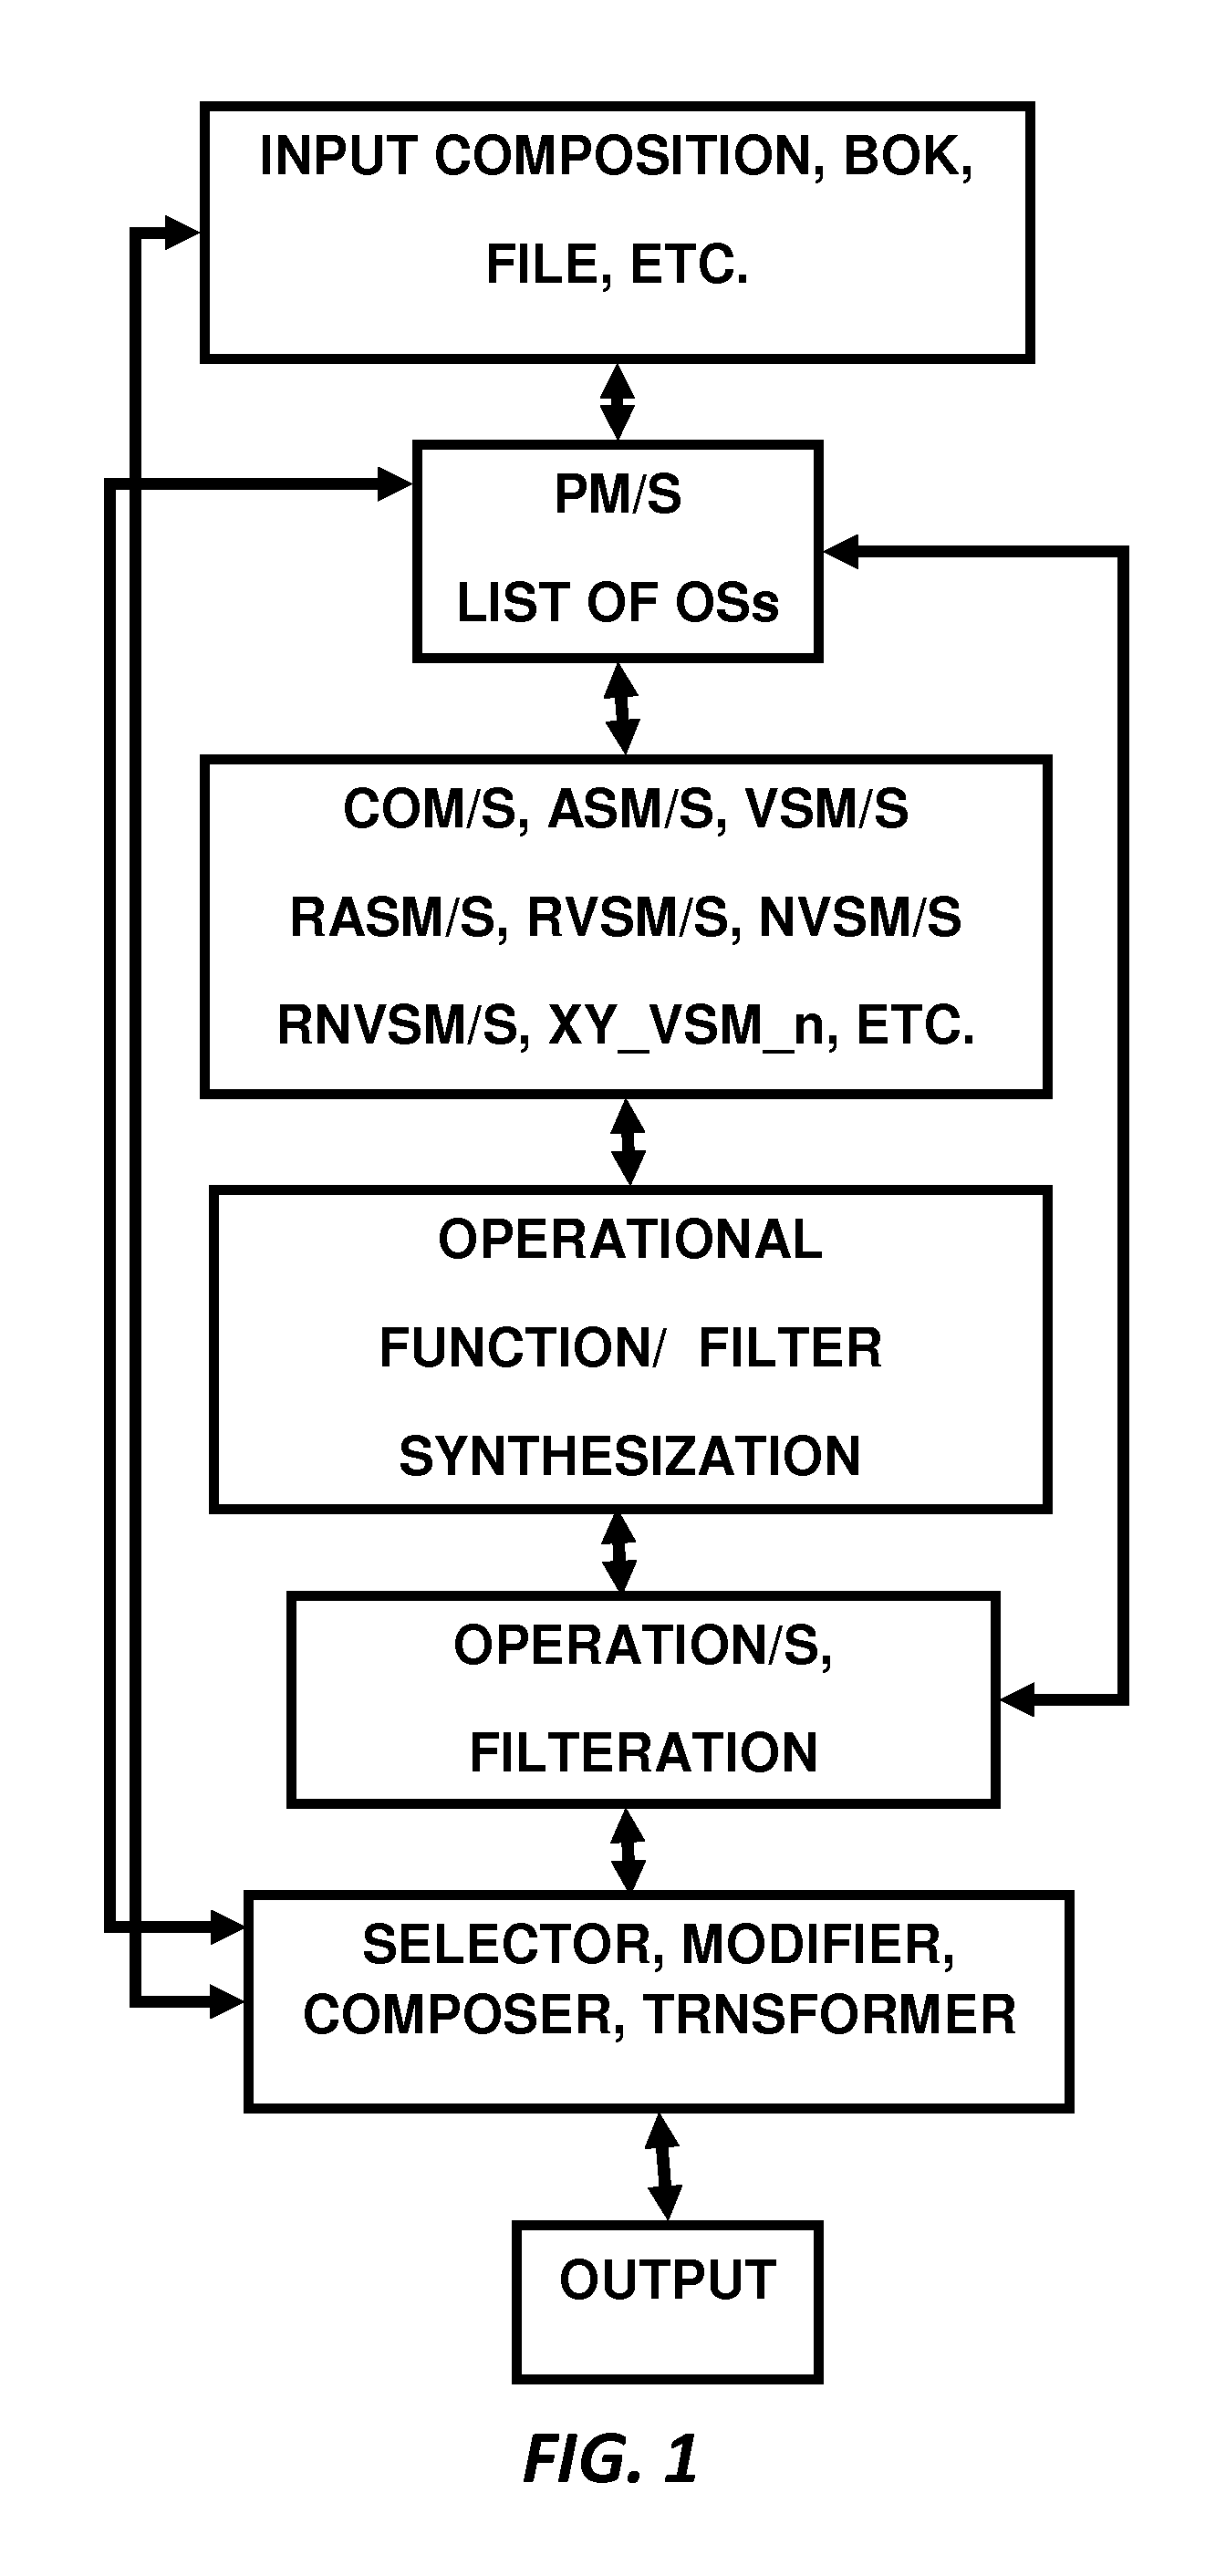 Methods and Systems For Investigation of Compositions of Ontological Subjects